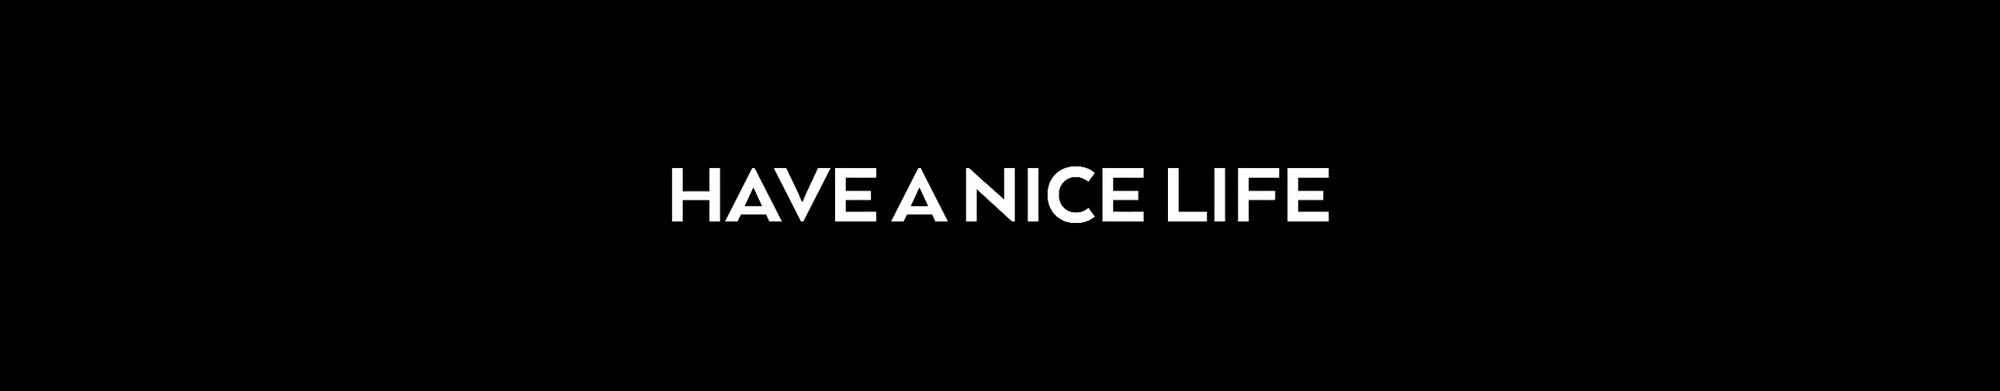 HAVE A NICE LIFE